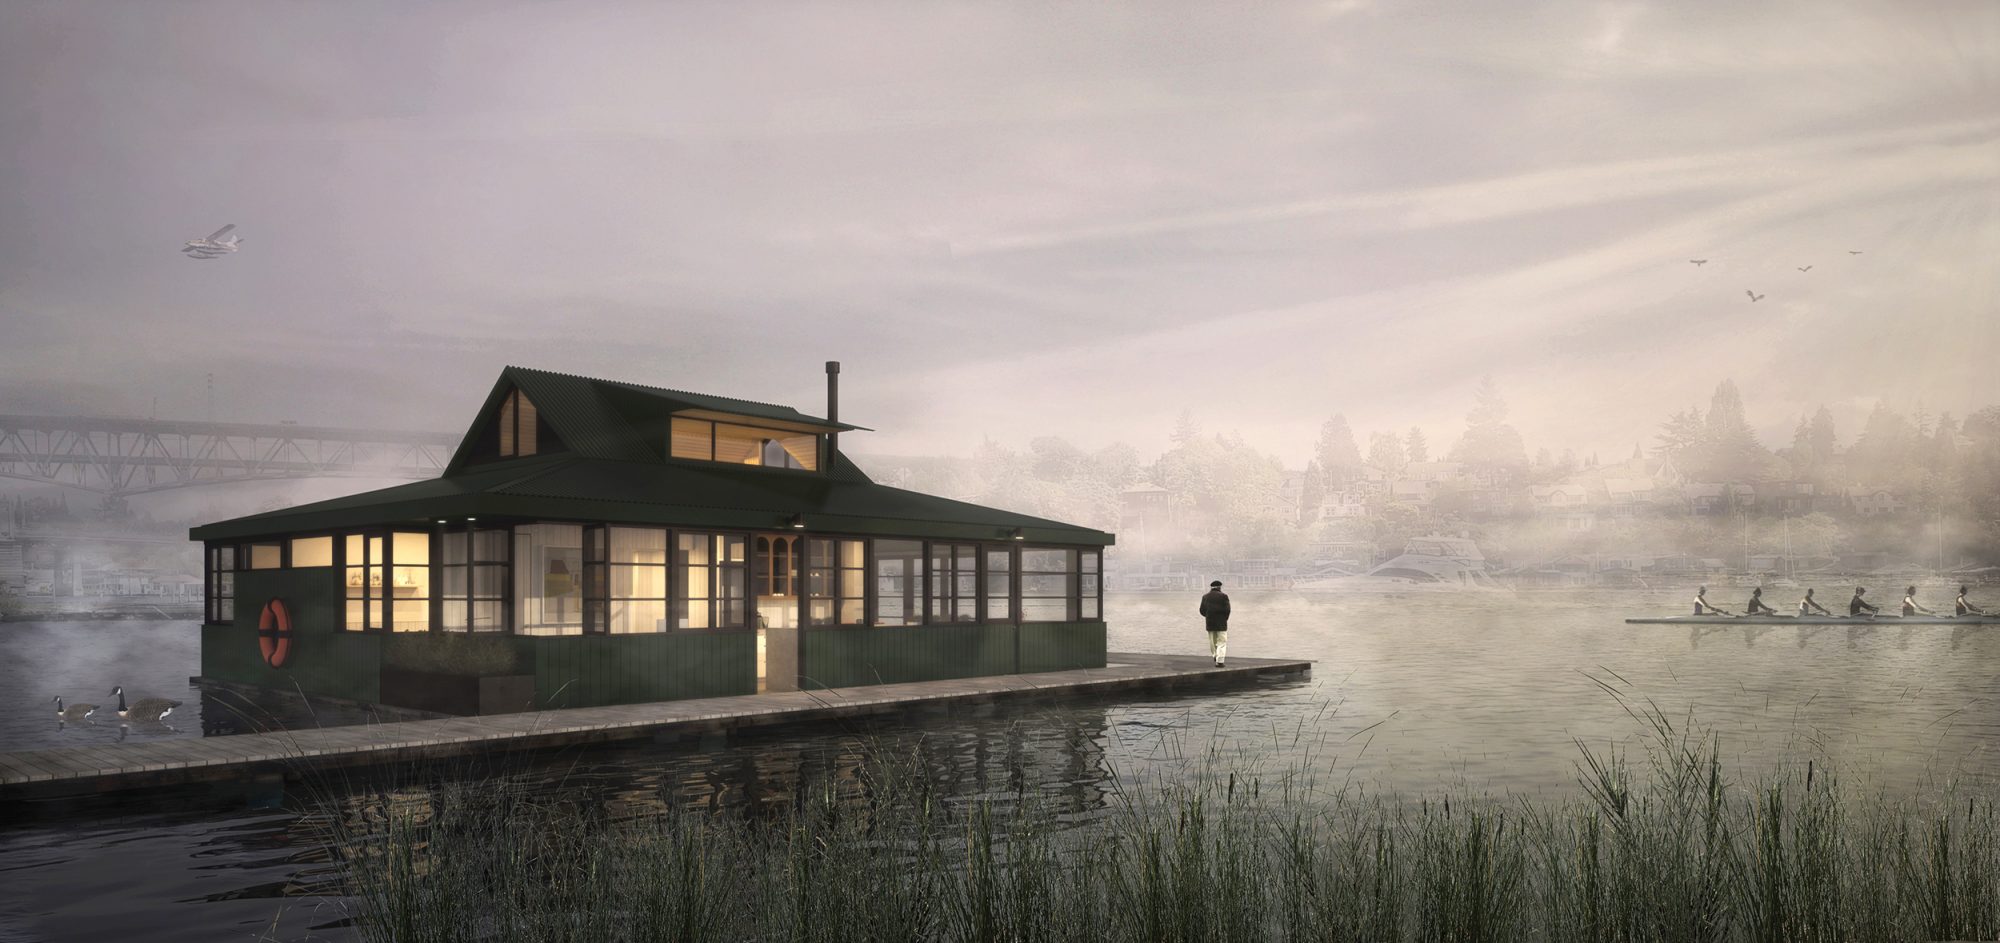 PORTAGE BAY HOUSEBOAT CONCEPT RENDERING ROWING